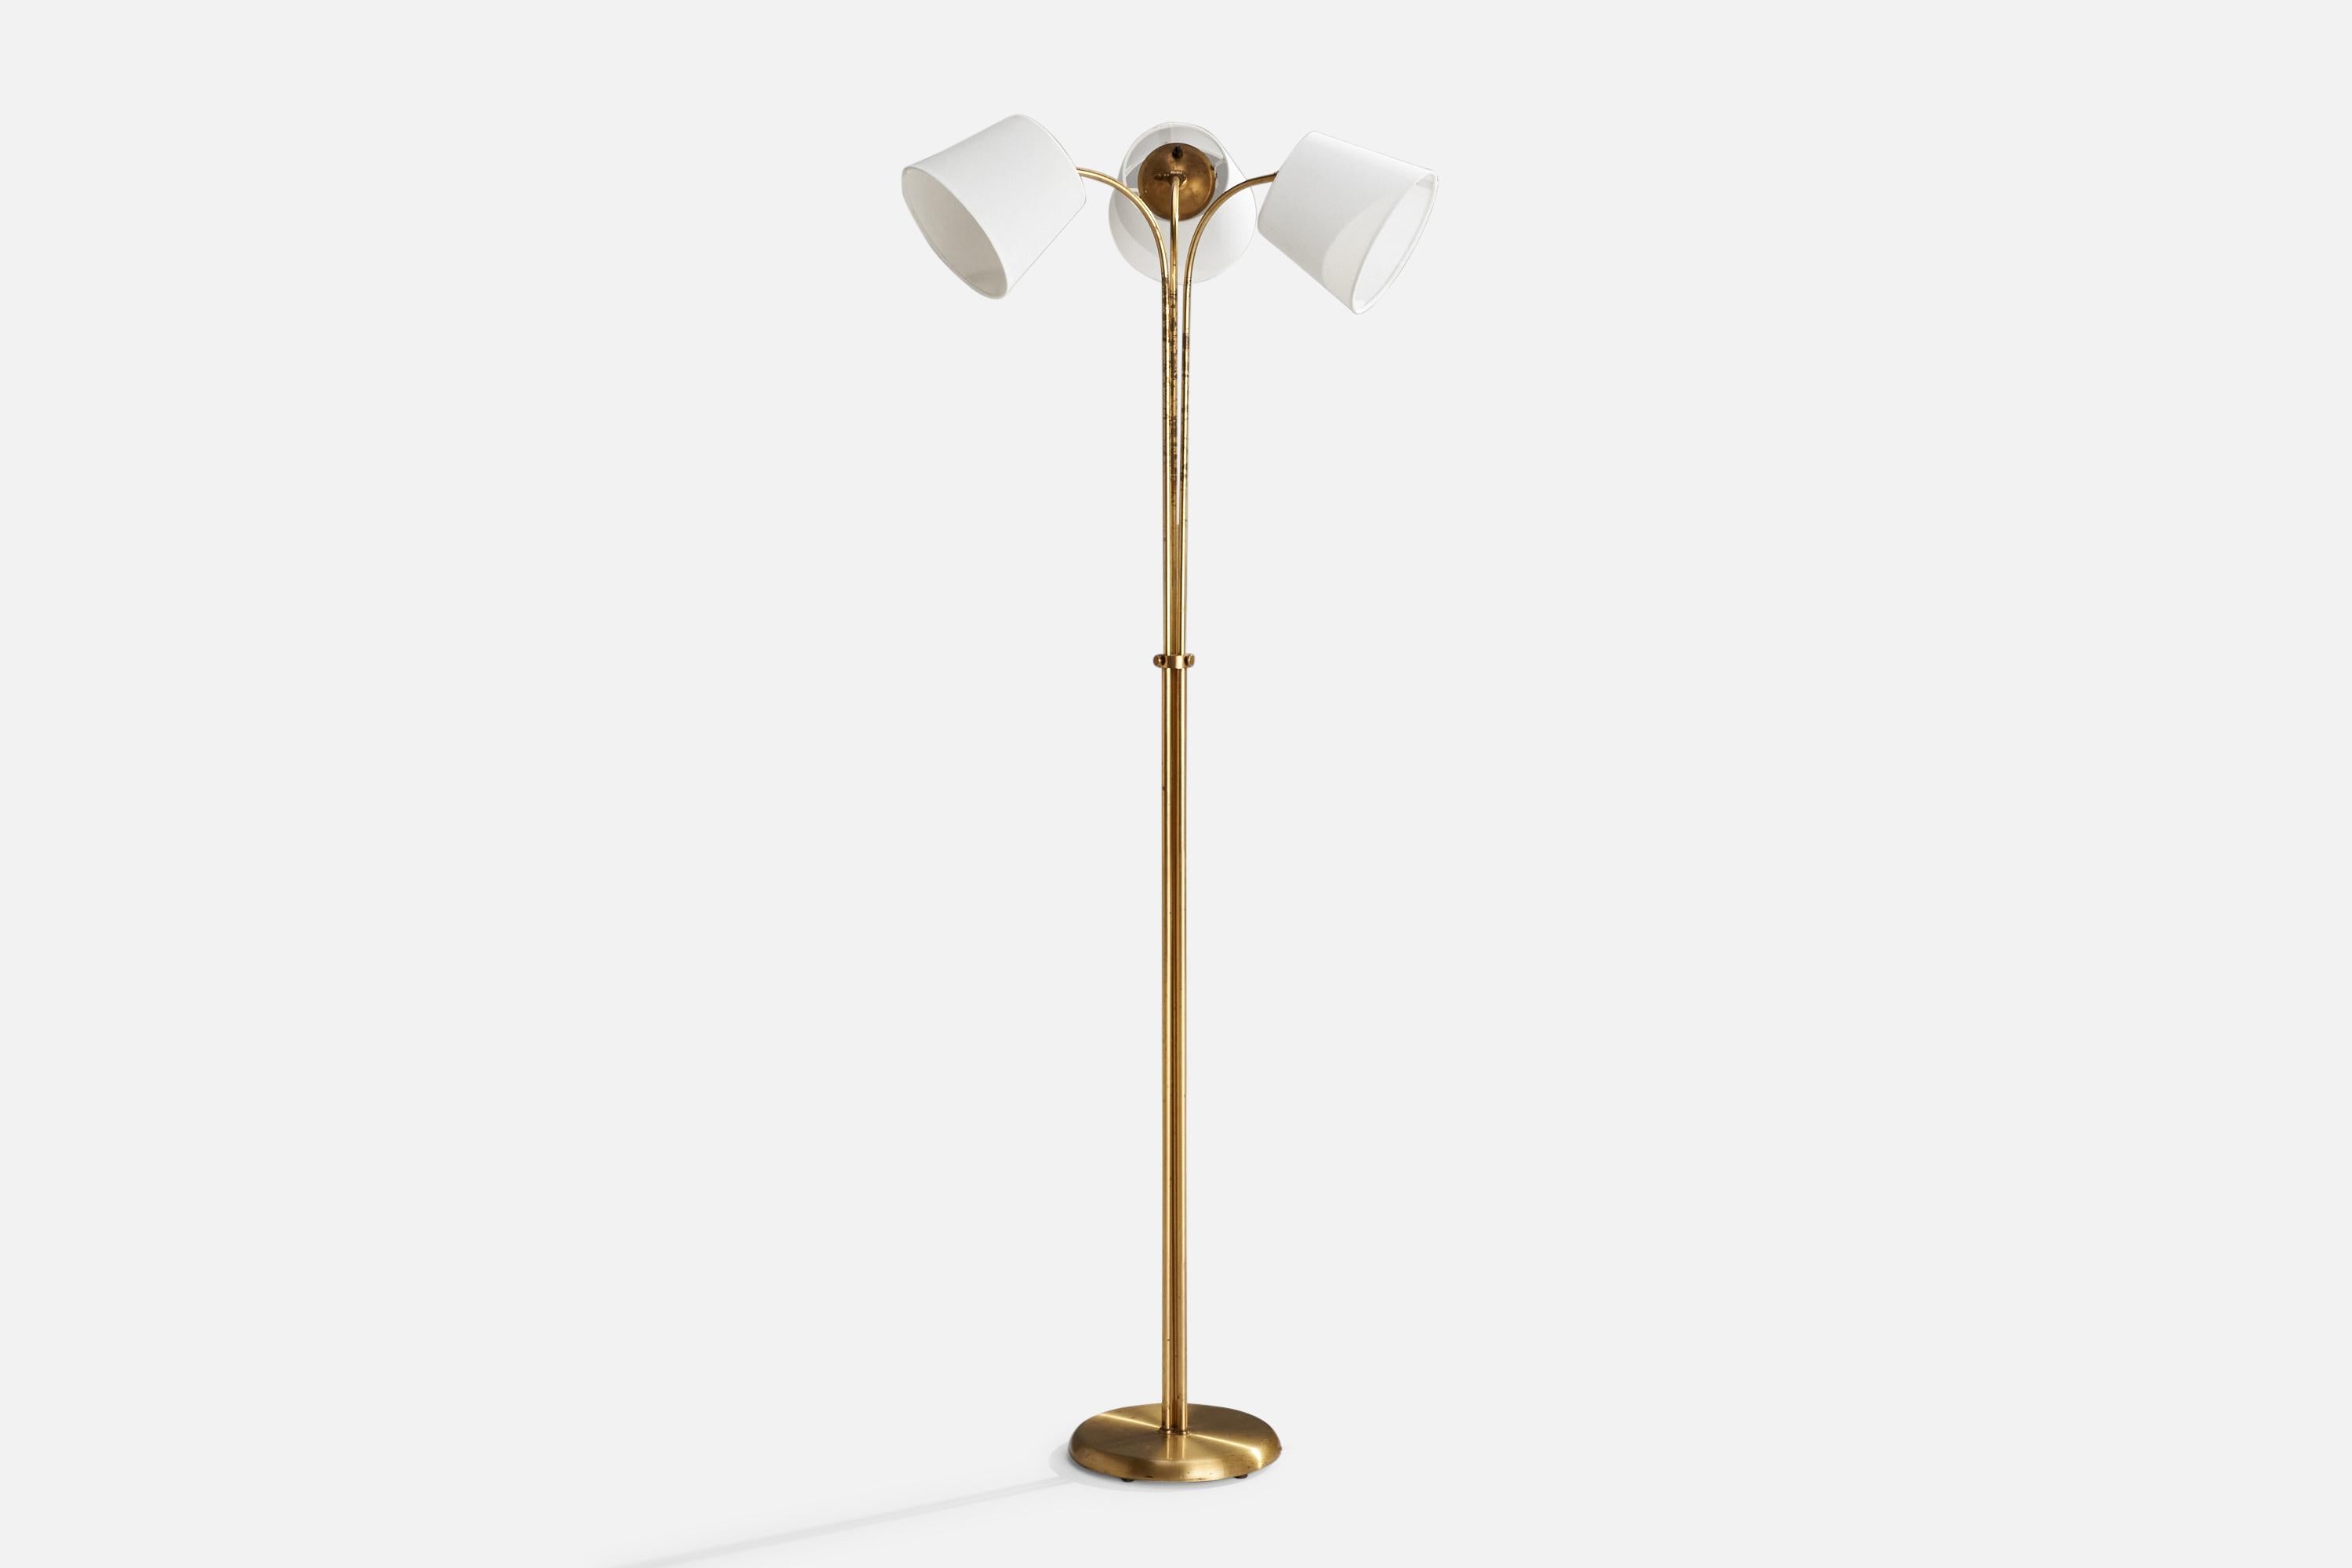 An adjustable three-armed brass and ﻿white fabric floor lamp designed and produced in Sweden, 1940s.

Dimensions Variable 
Overall Dimensions (inches): 63.5” H x 27.5” W x 19.75” D
Stated dimensions include shade.
Bulb Specifications: E-26